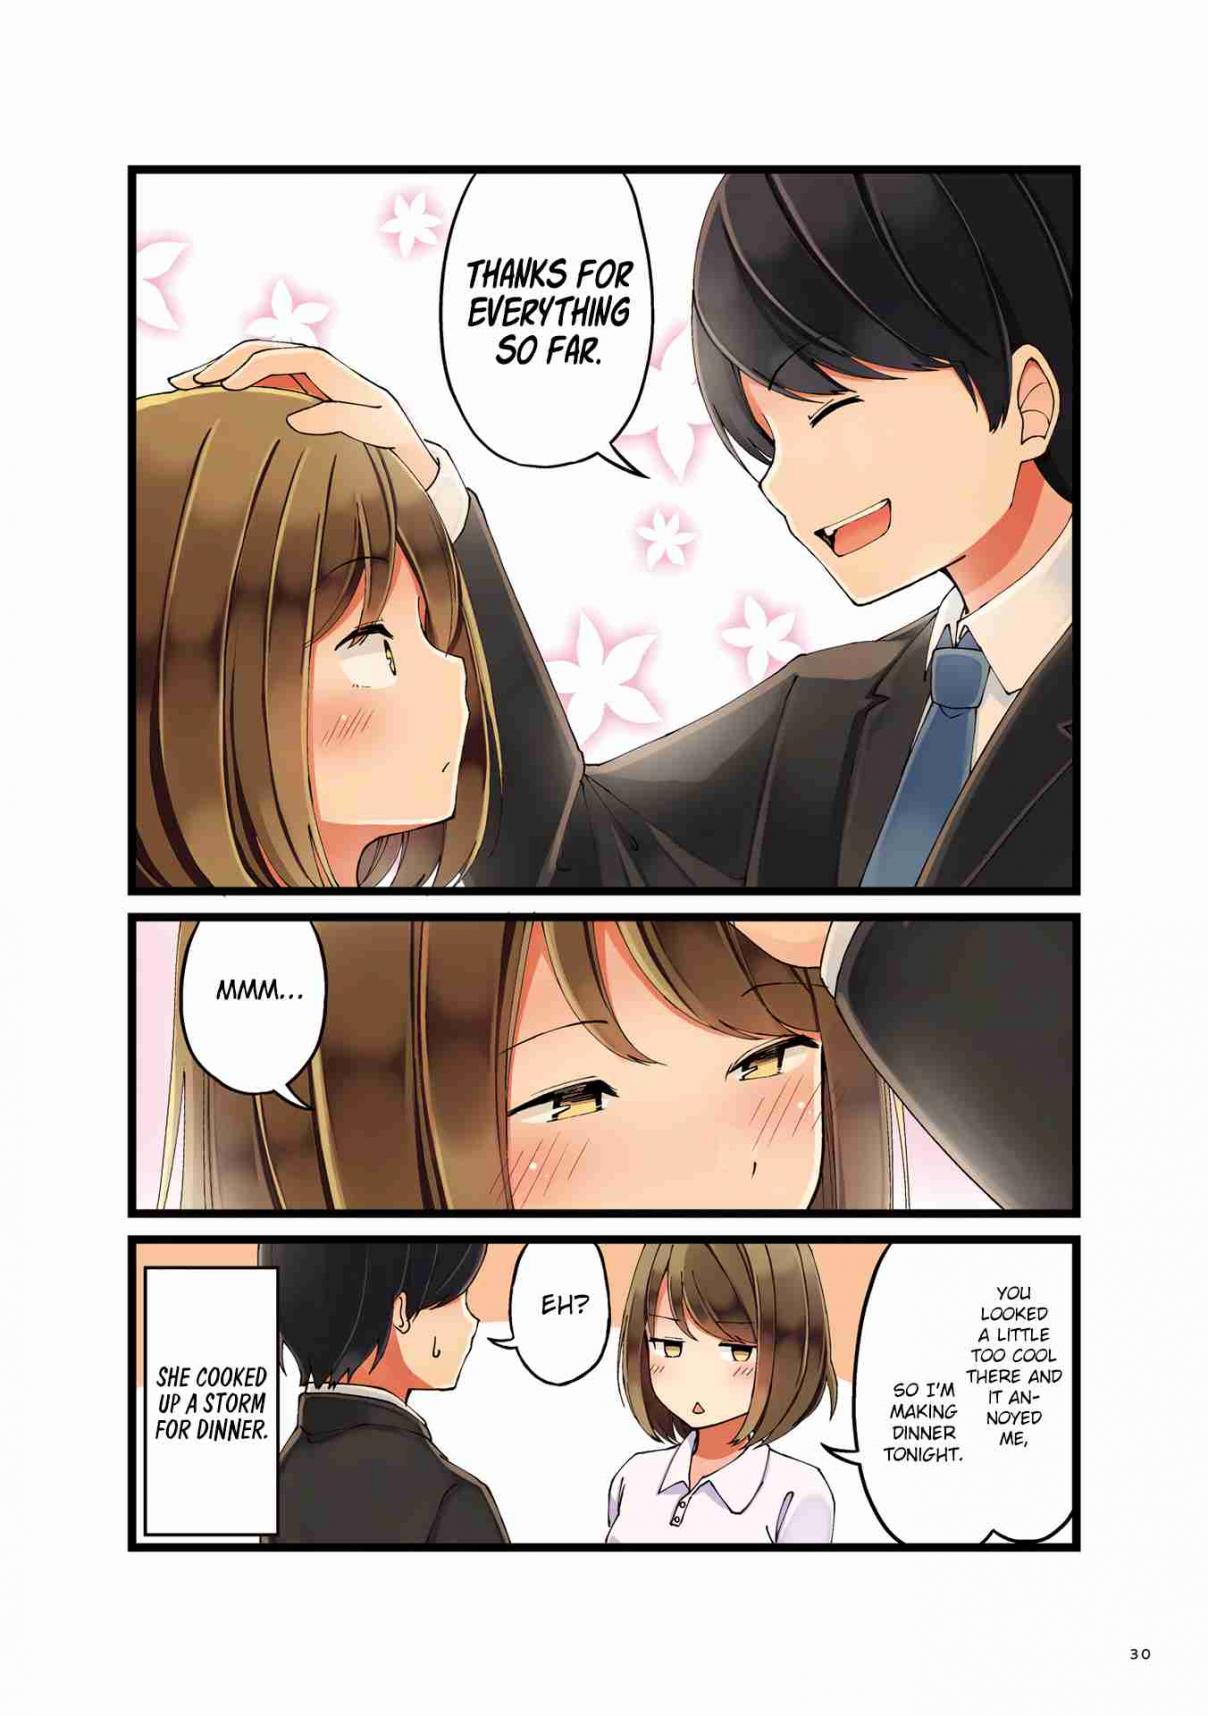 First Comes Love, Then Comes Marriage Vol. 1 Ch. 1 I overslept and my fiance was thankful